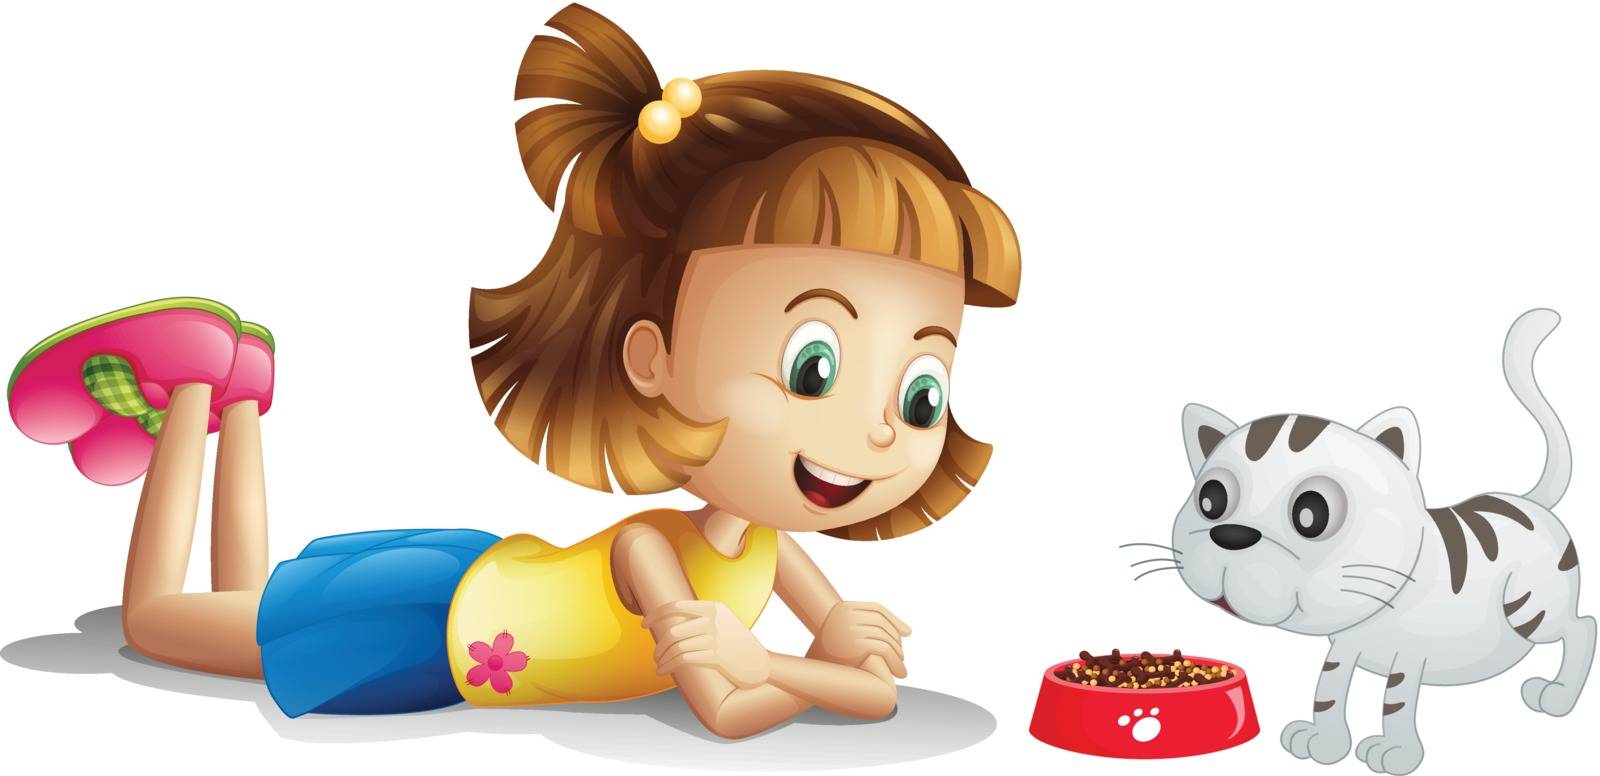 Illustration of a young girl watching her pet eating on a white background